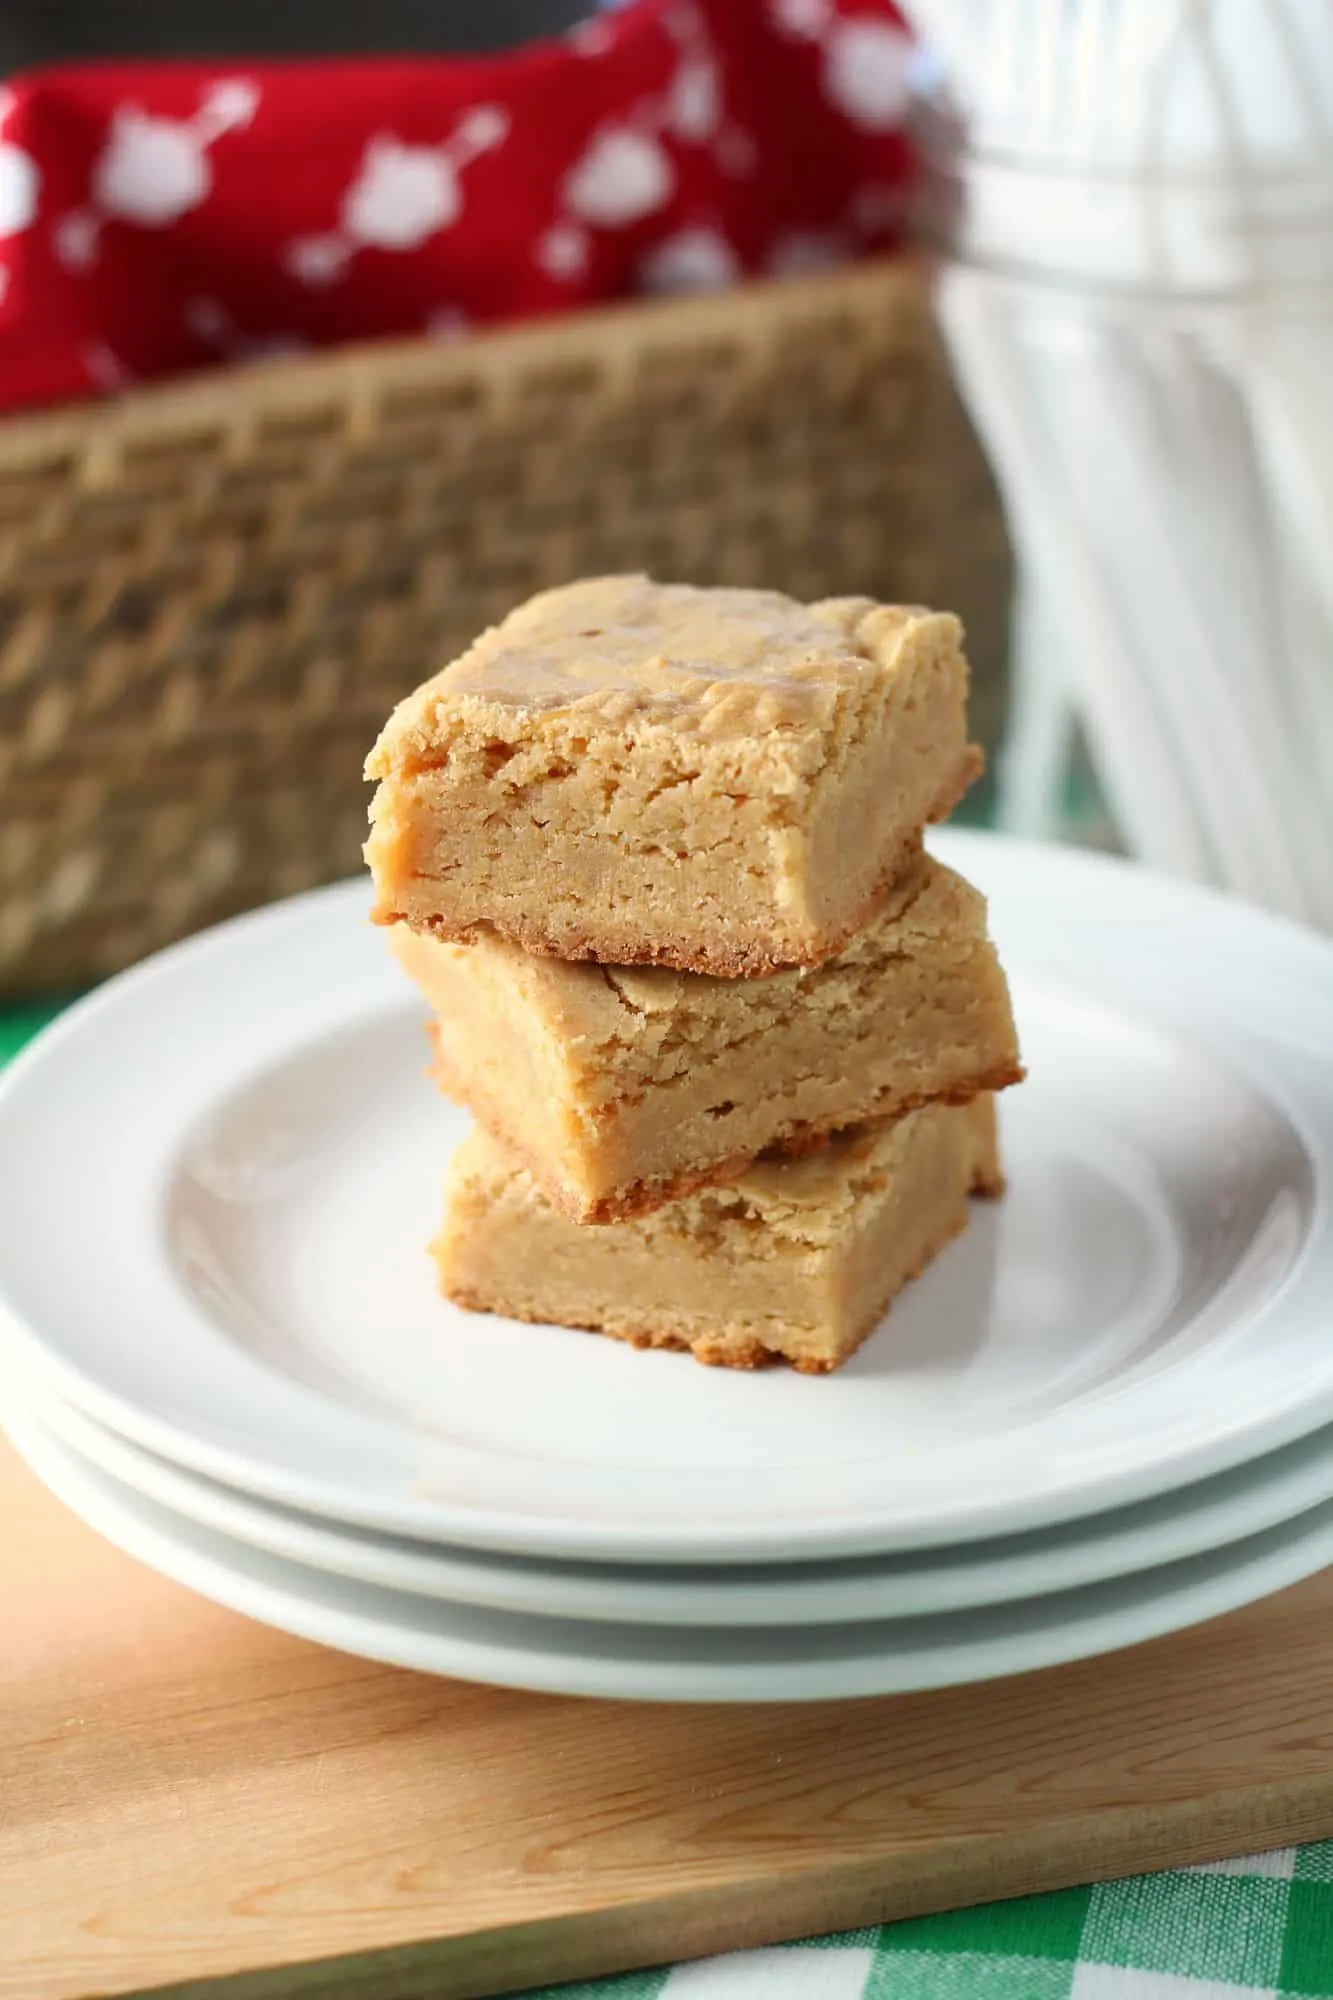 Blondies are a classic favorite dessert for a crowd